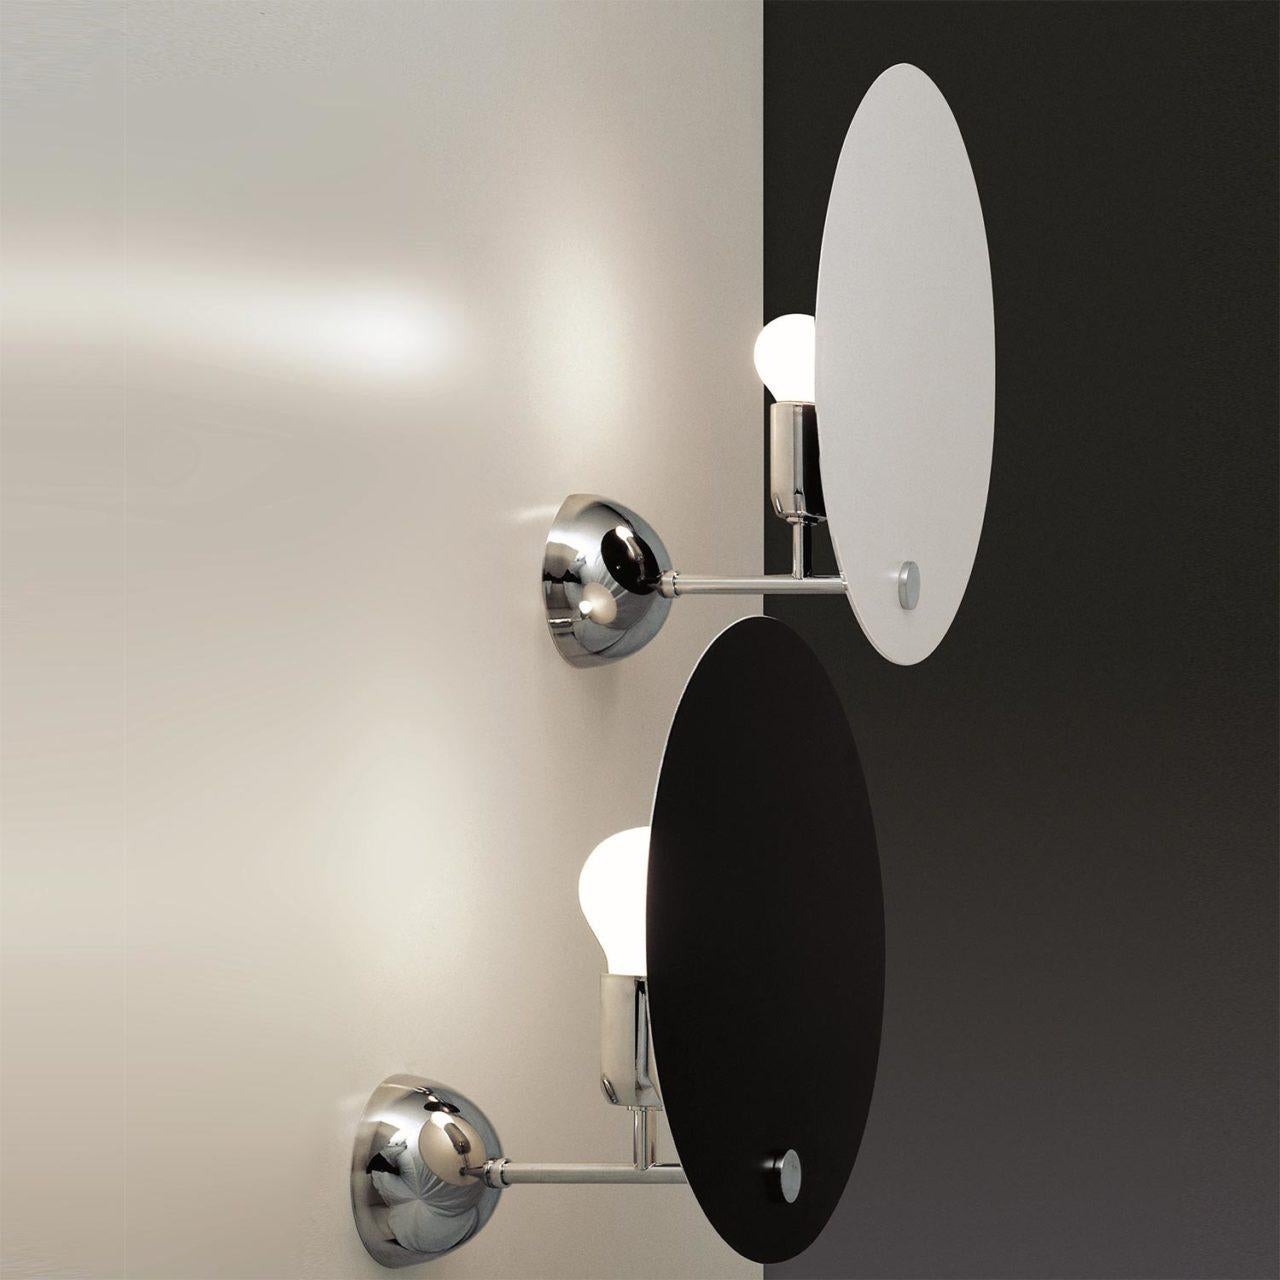 Vico Magistretti 'Kuta' wall lamp for Nemo in white.

A wall lamp originally designed in the 1970's by renowned Italian designed Vico Magistretti, the Kuta features a circular reflector executed in aluminum.  This clever design, featuring a circular